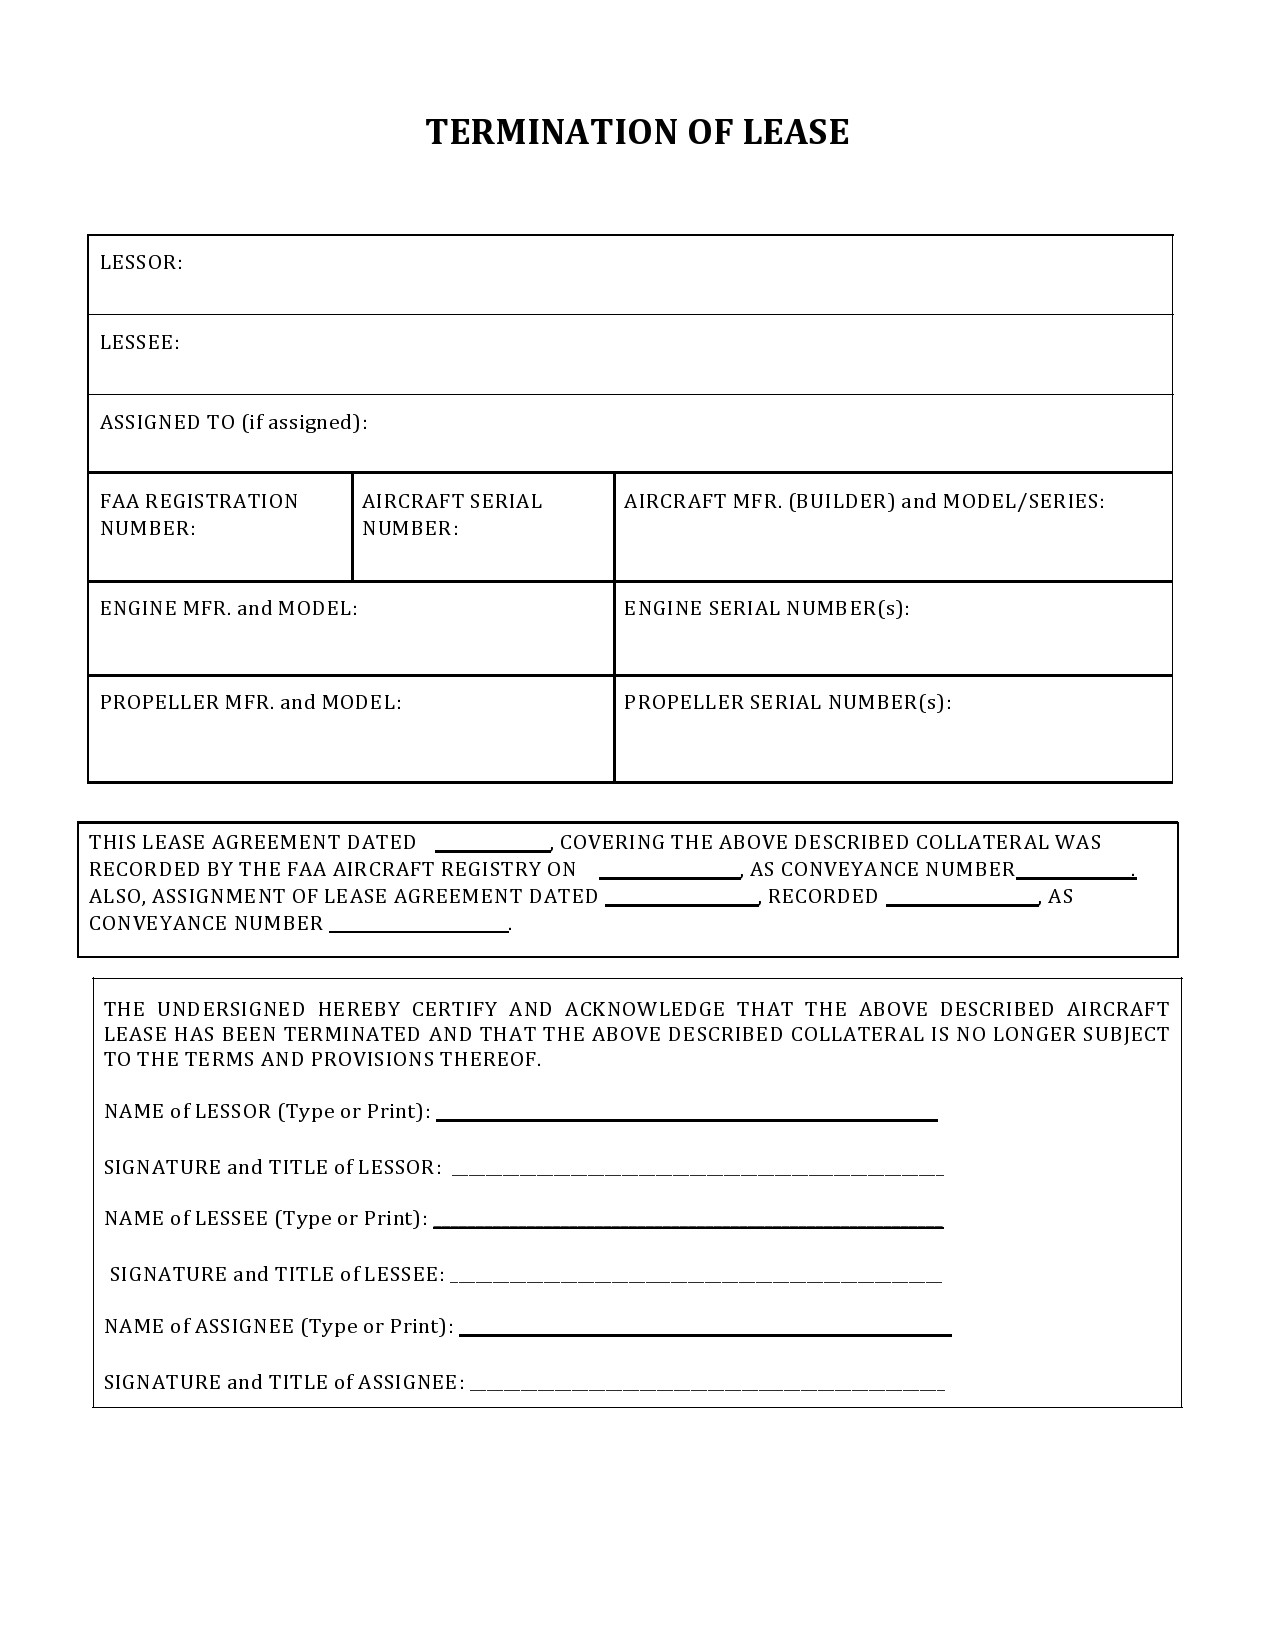 Free lease termination agreement 39